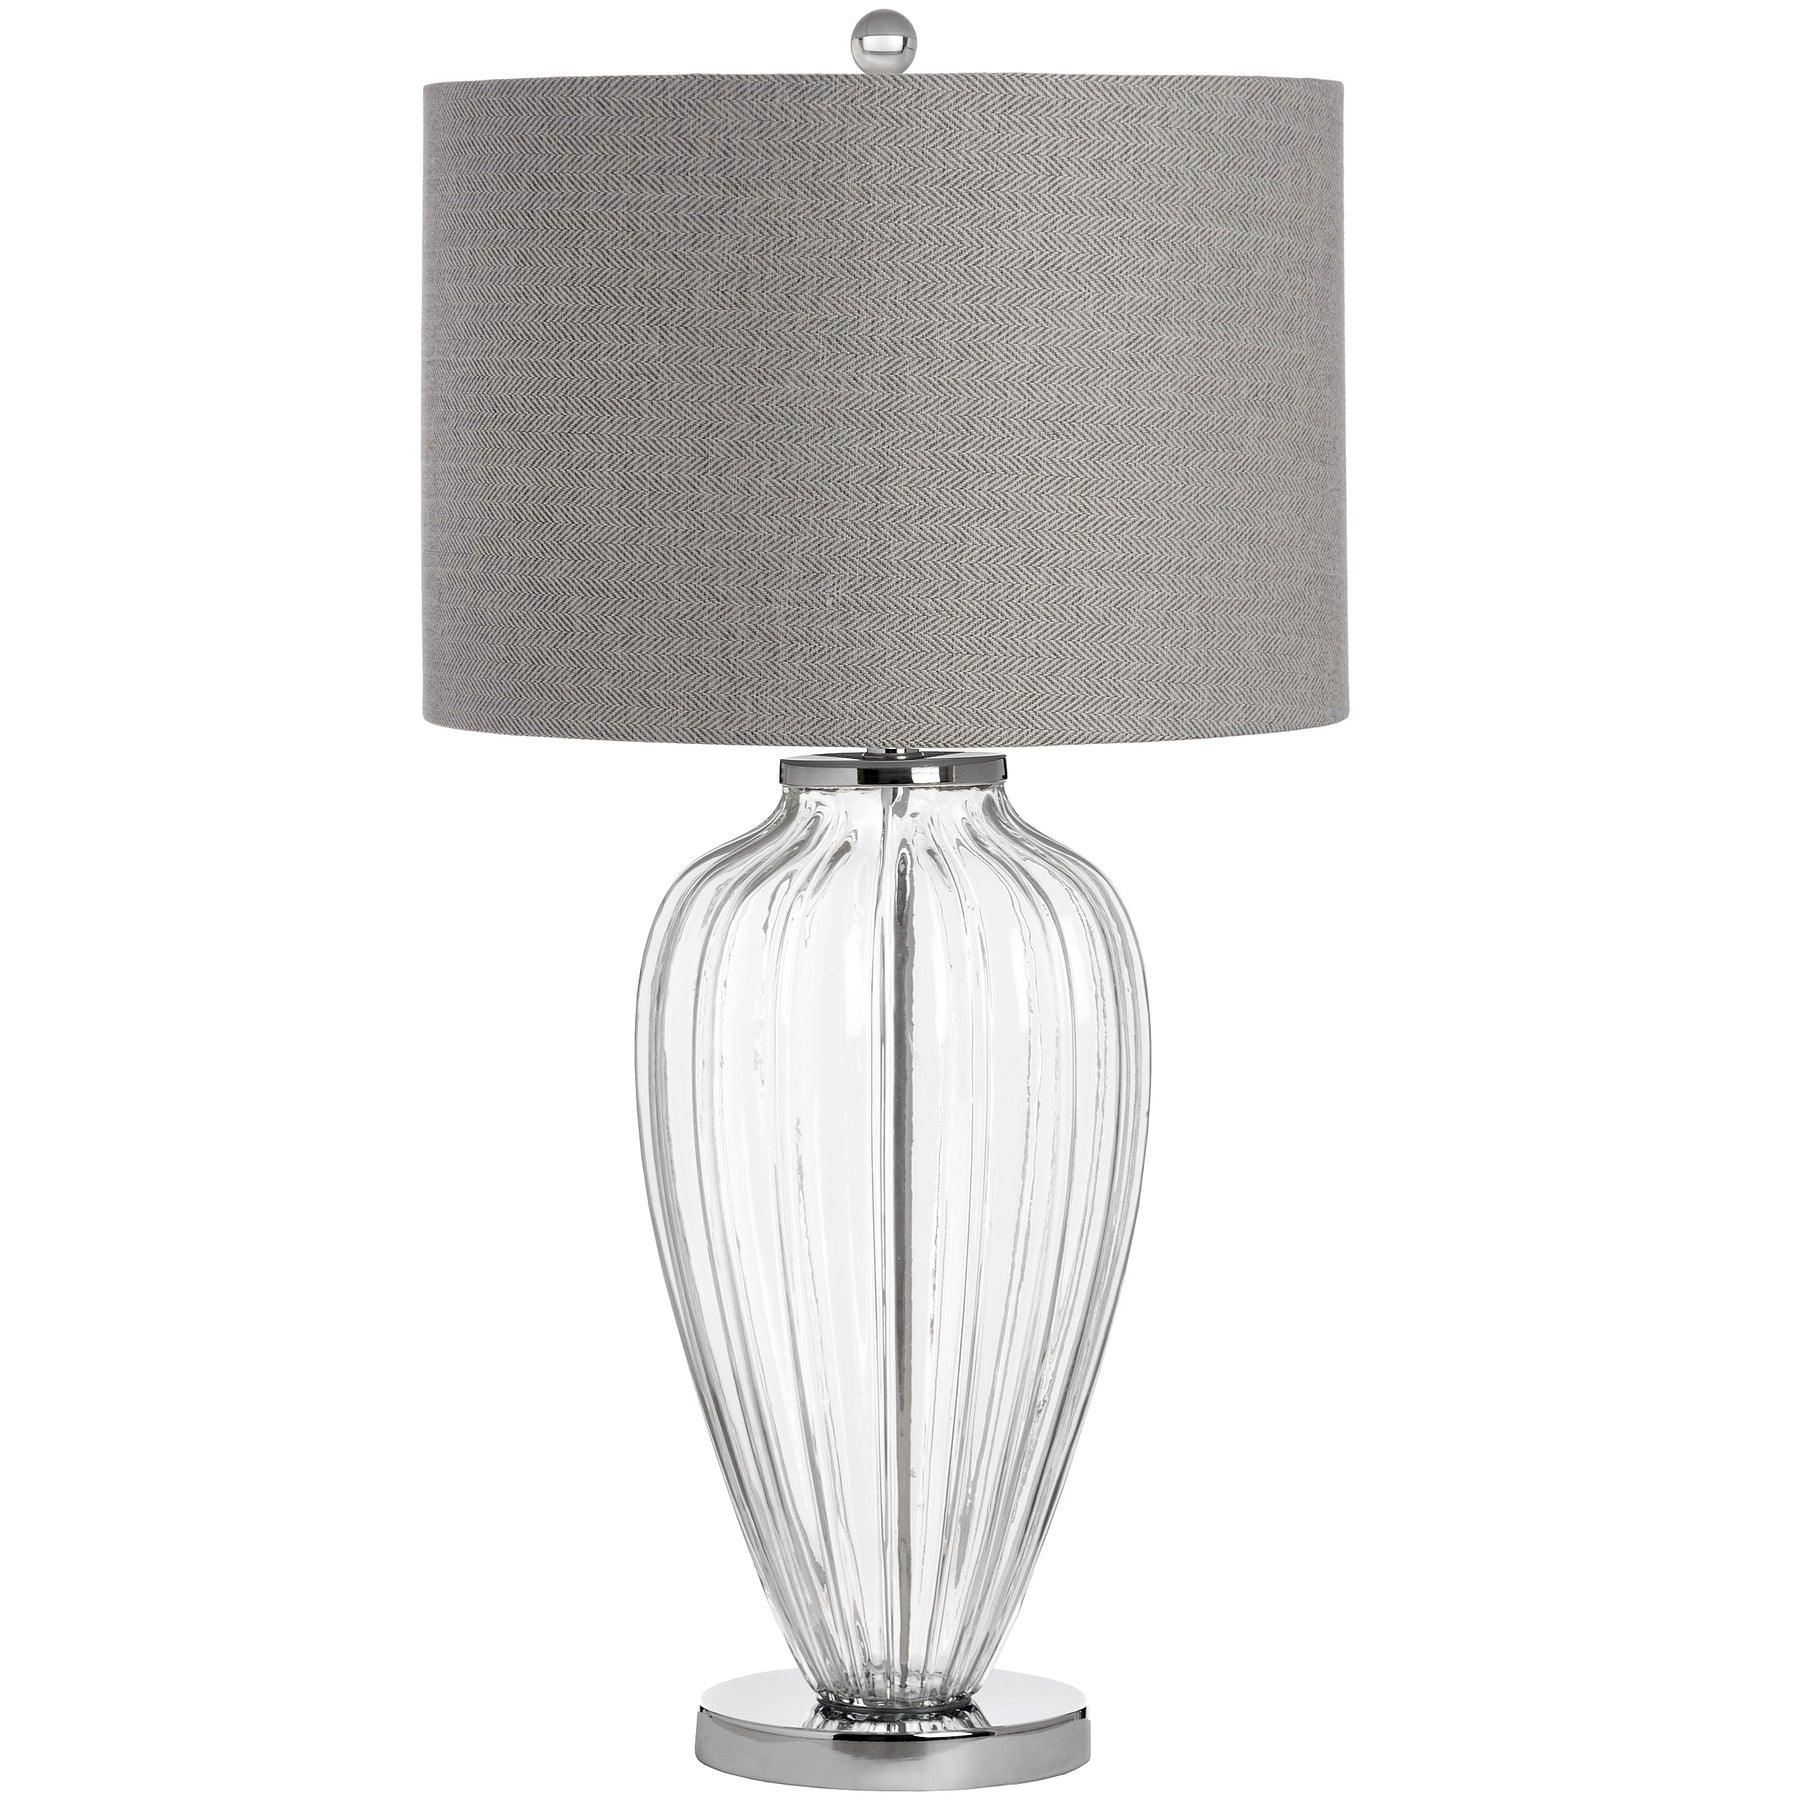 View Bologna Glass Table Lamp information